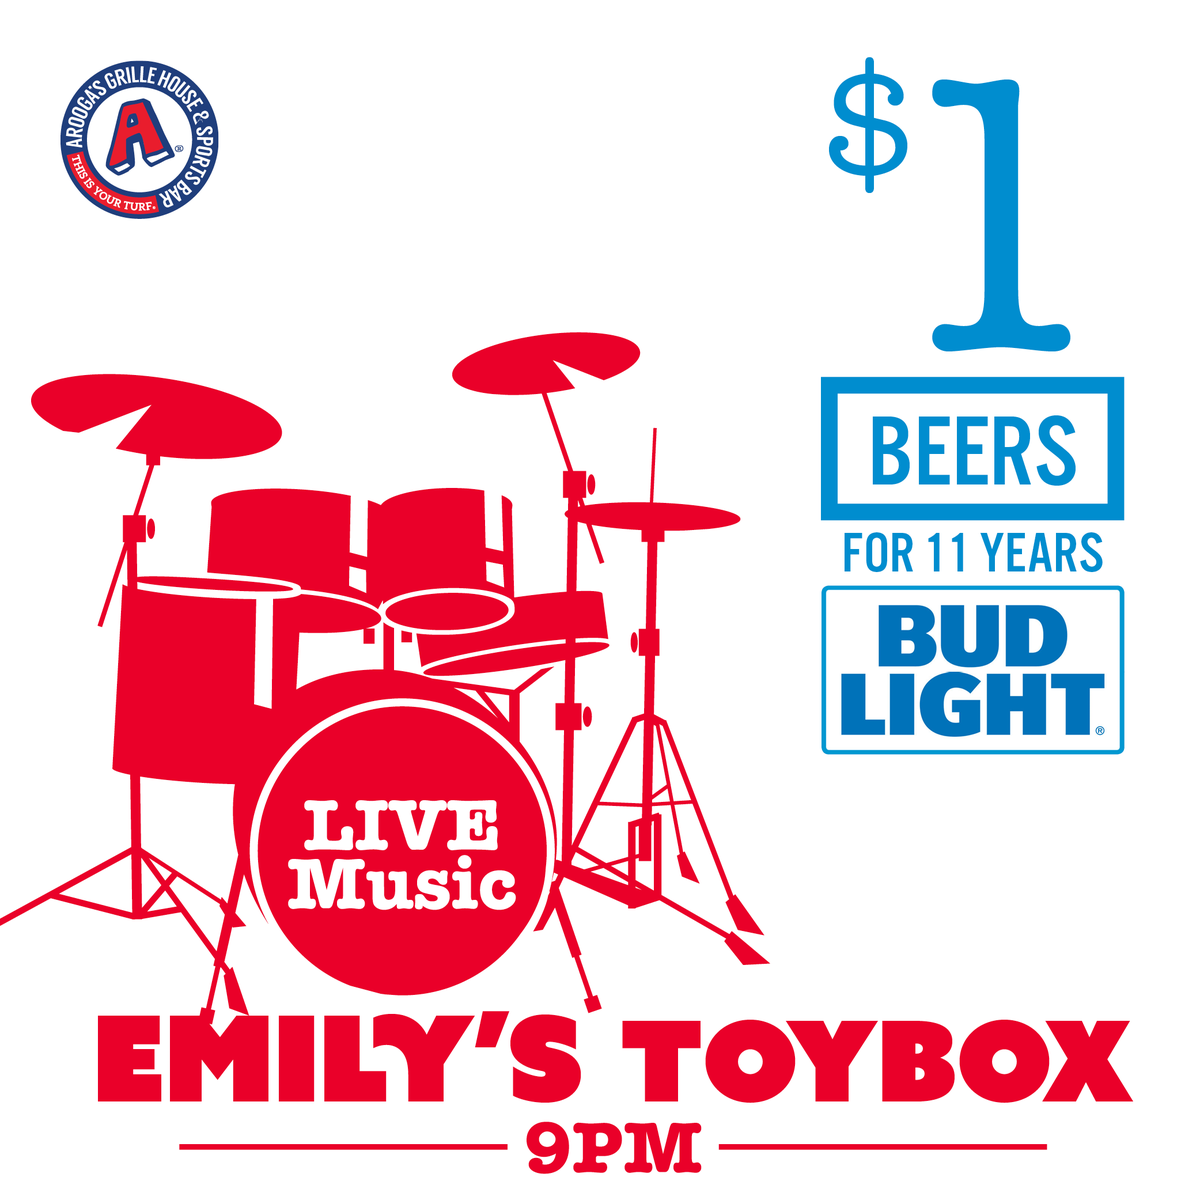 $1 Bud Light Beers for 11 Years!!! Helping us celebrate tonight at 9pm is Emily's ToyBox !